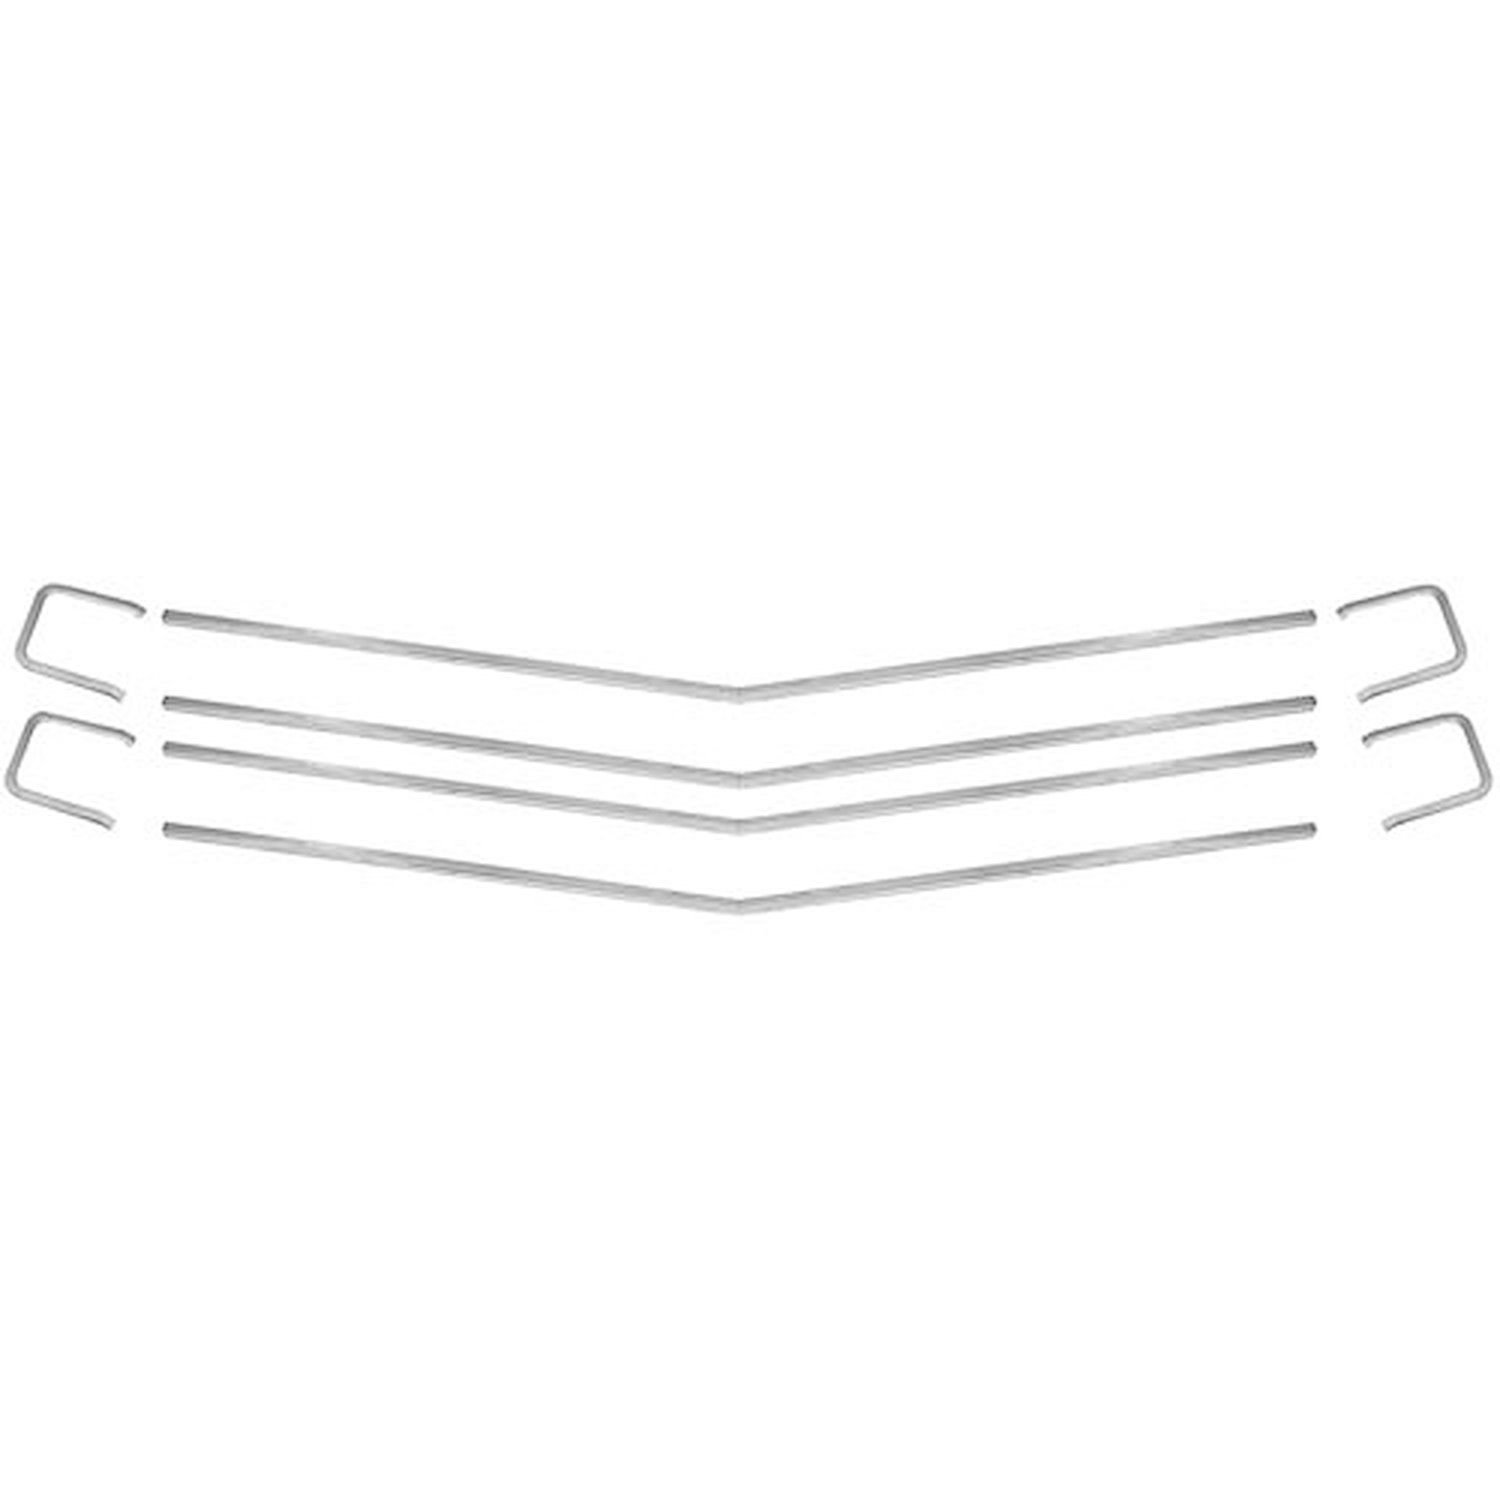 SS Grille Molding Complete Set 1970 Chevelle/El Camino